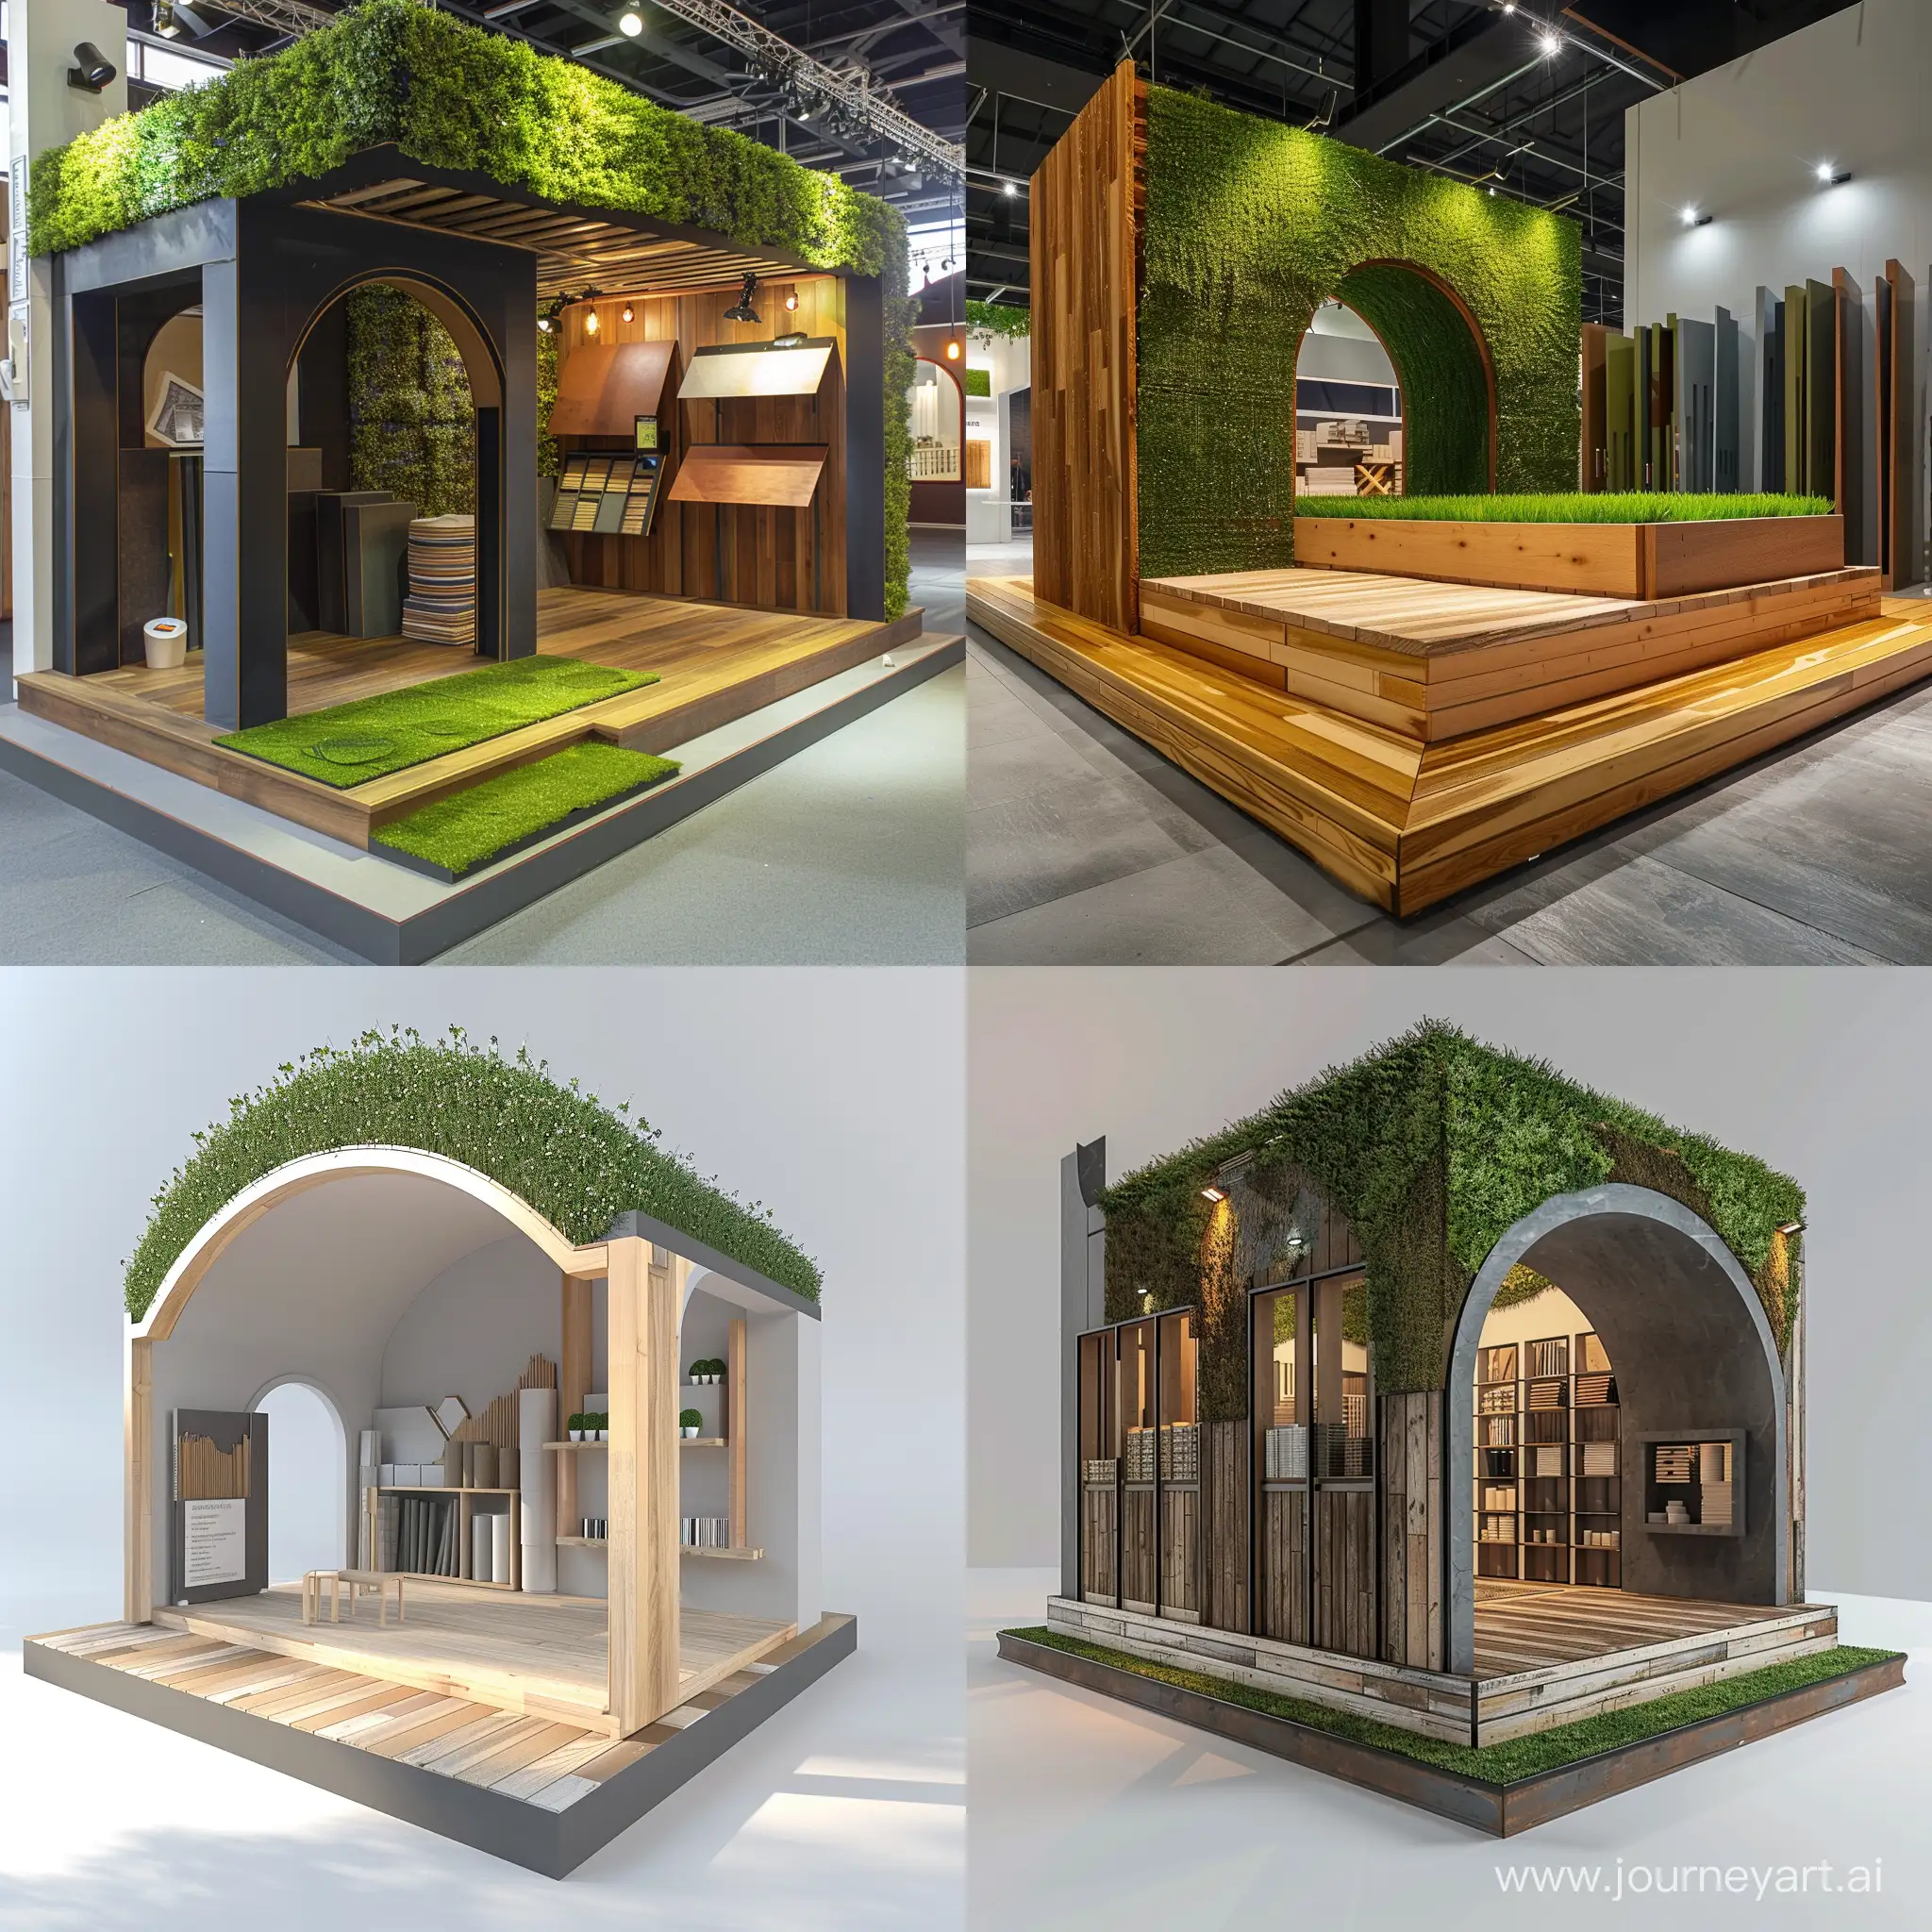 Innovative-Trade-Booth-Wooden-Platform-with-Grass-Entrance-Arch